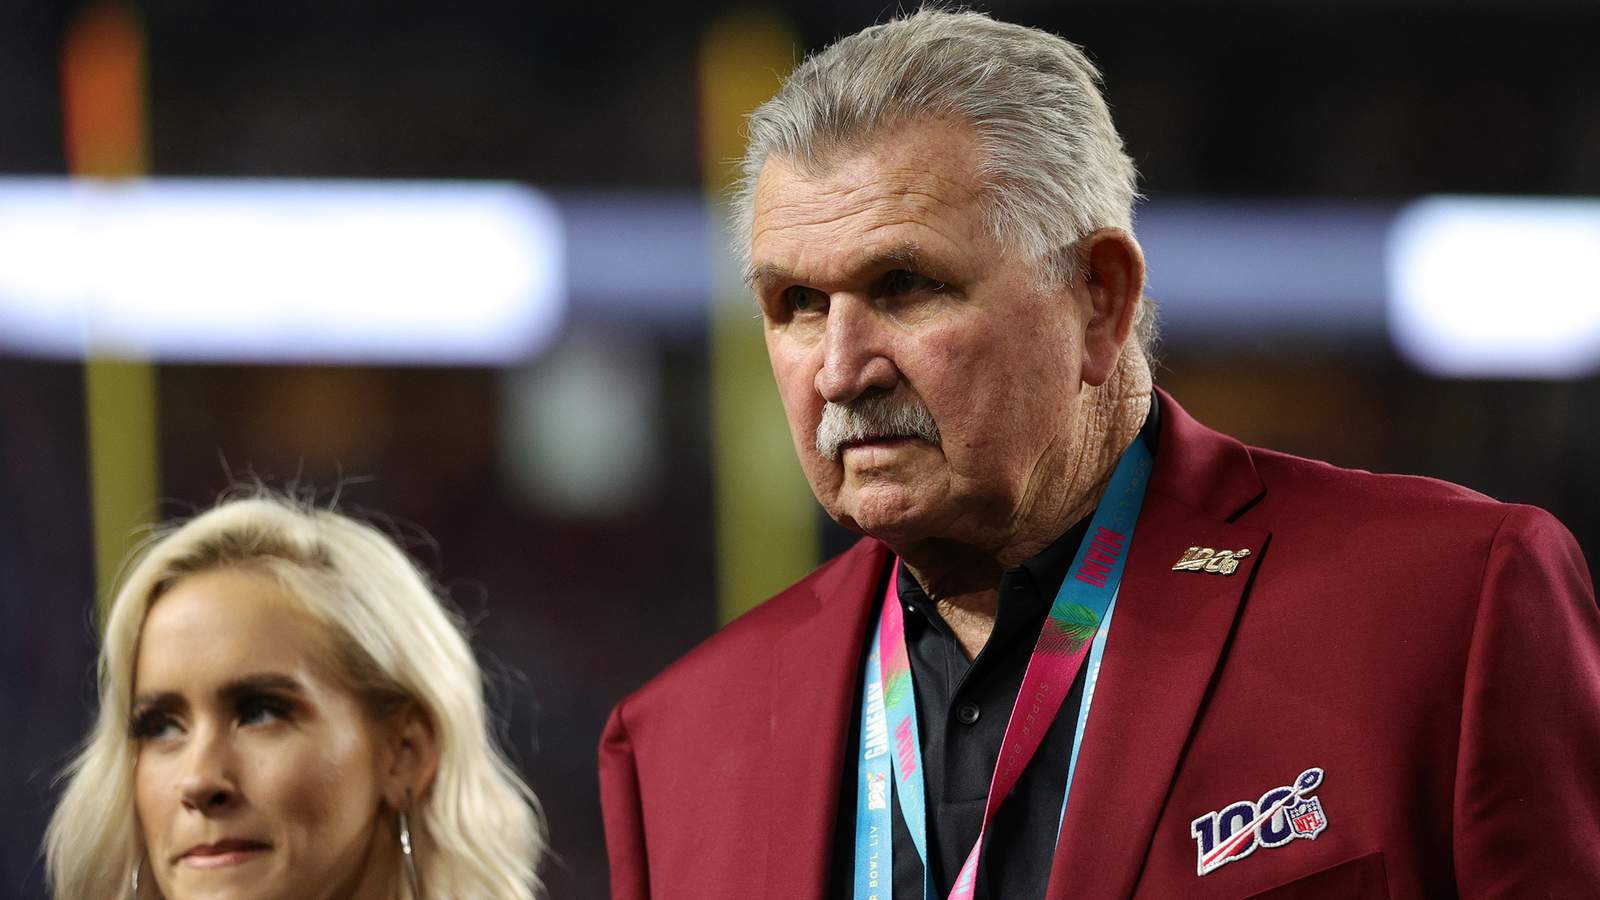 Get the hell out of the country: Mike Ditka says to national anthem kneelers